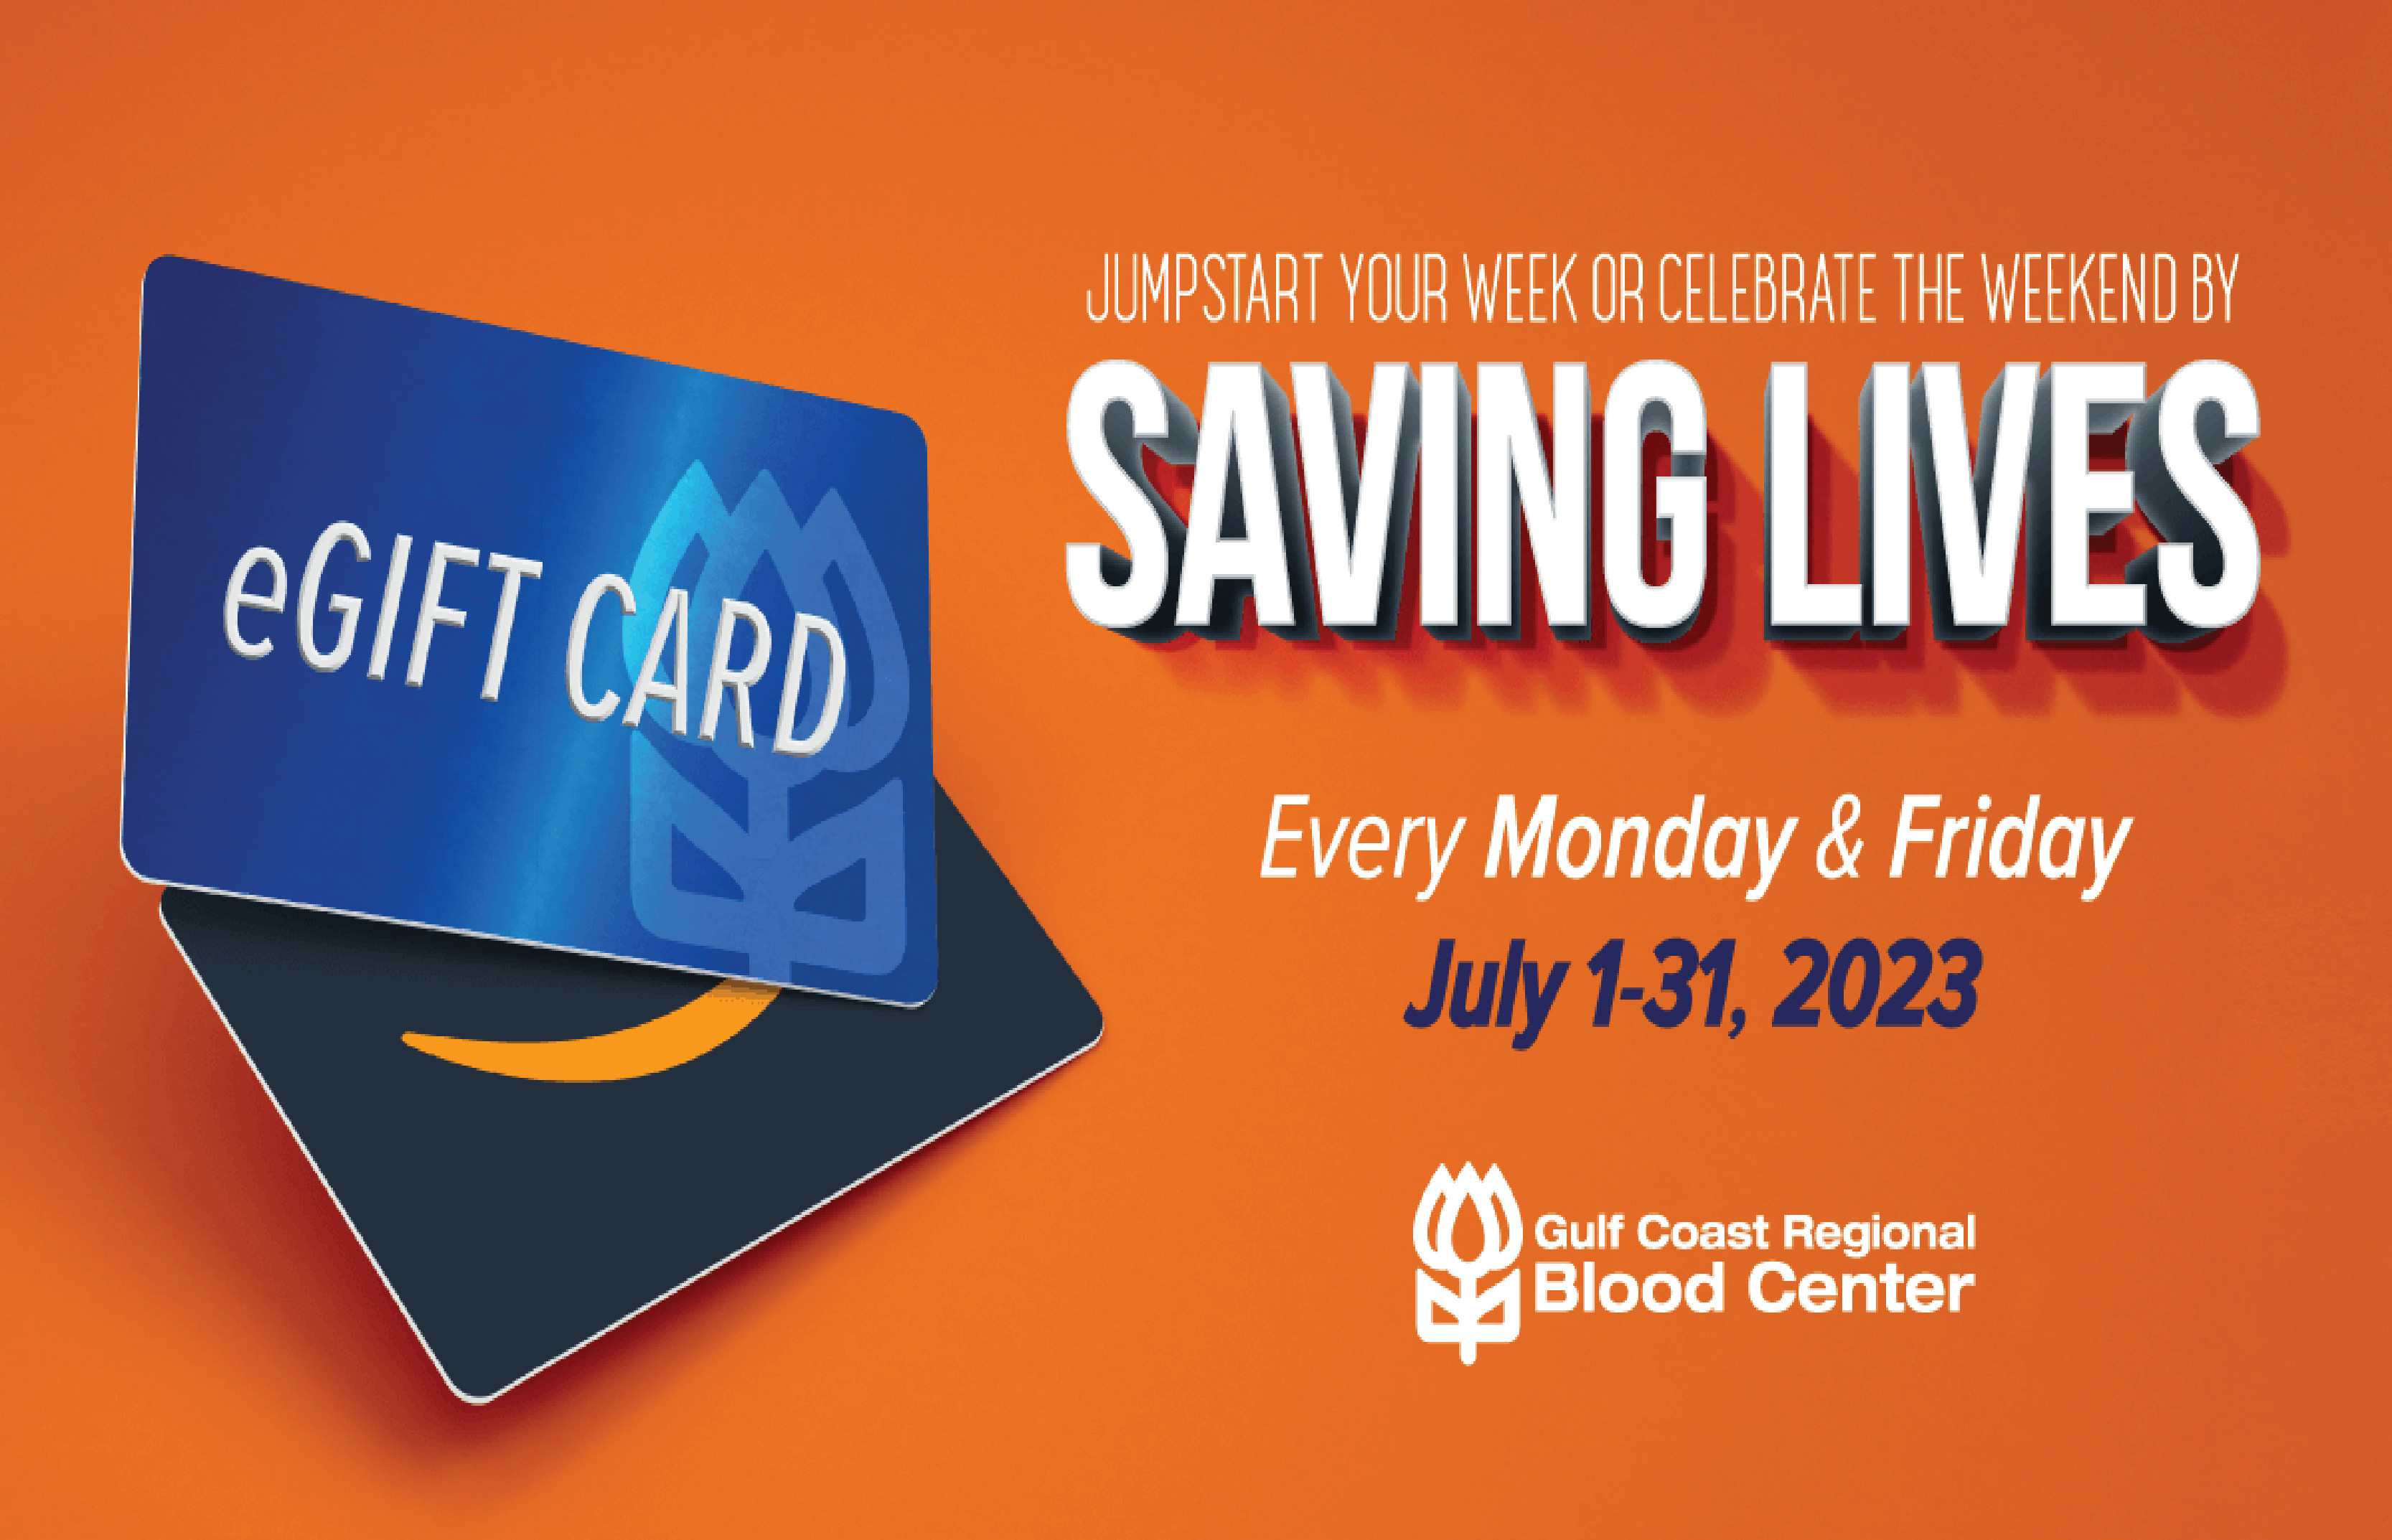 Save Lives, Get an eGift Card with Gulf Coast Regional Blood Centers